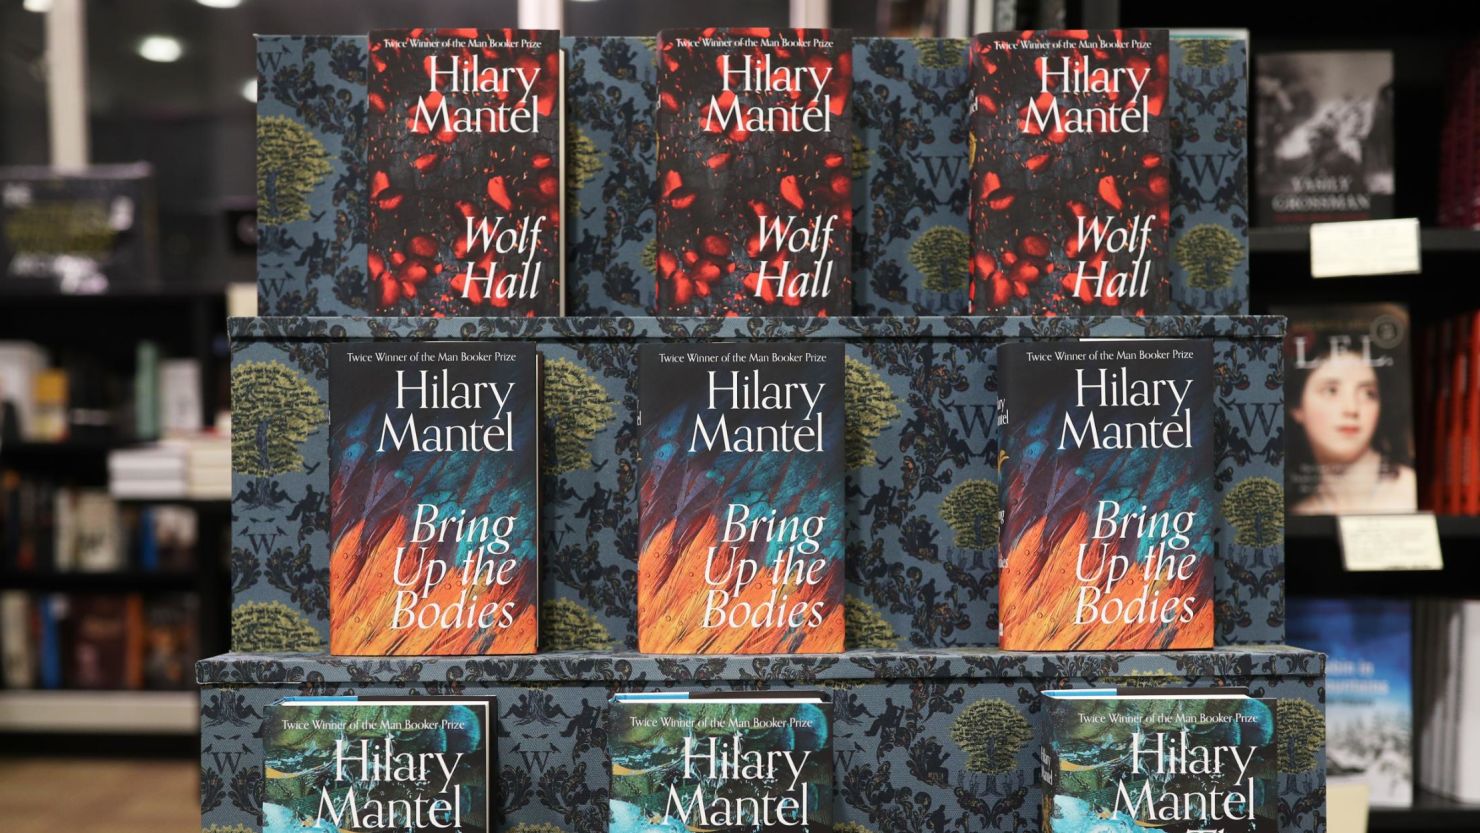 Copies of Hilary Mantel's book 'The Mirror & The Light' (bottom), alongside 'Wolf Hall' and 'Bring Up the Bodies', the three books in her Cromwell sequence, during a preview event at Waterstones in London. 